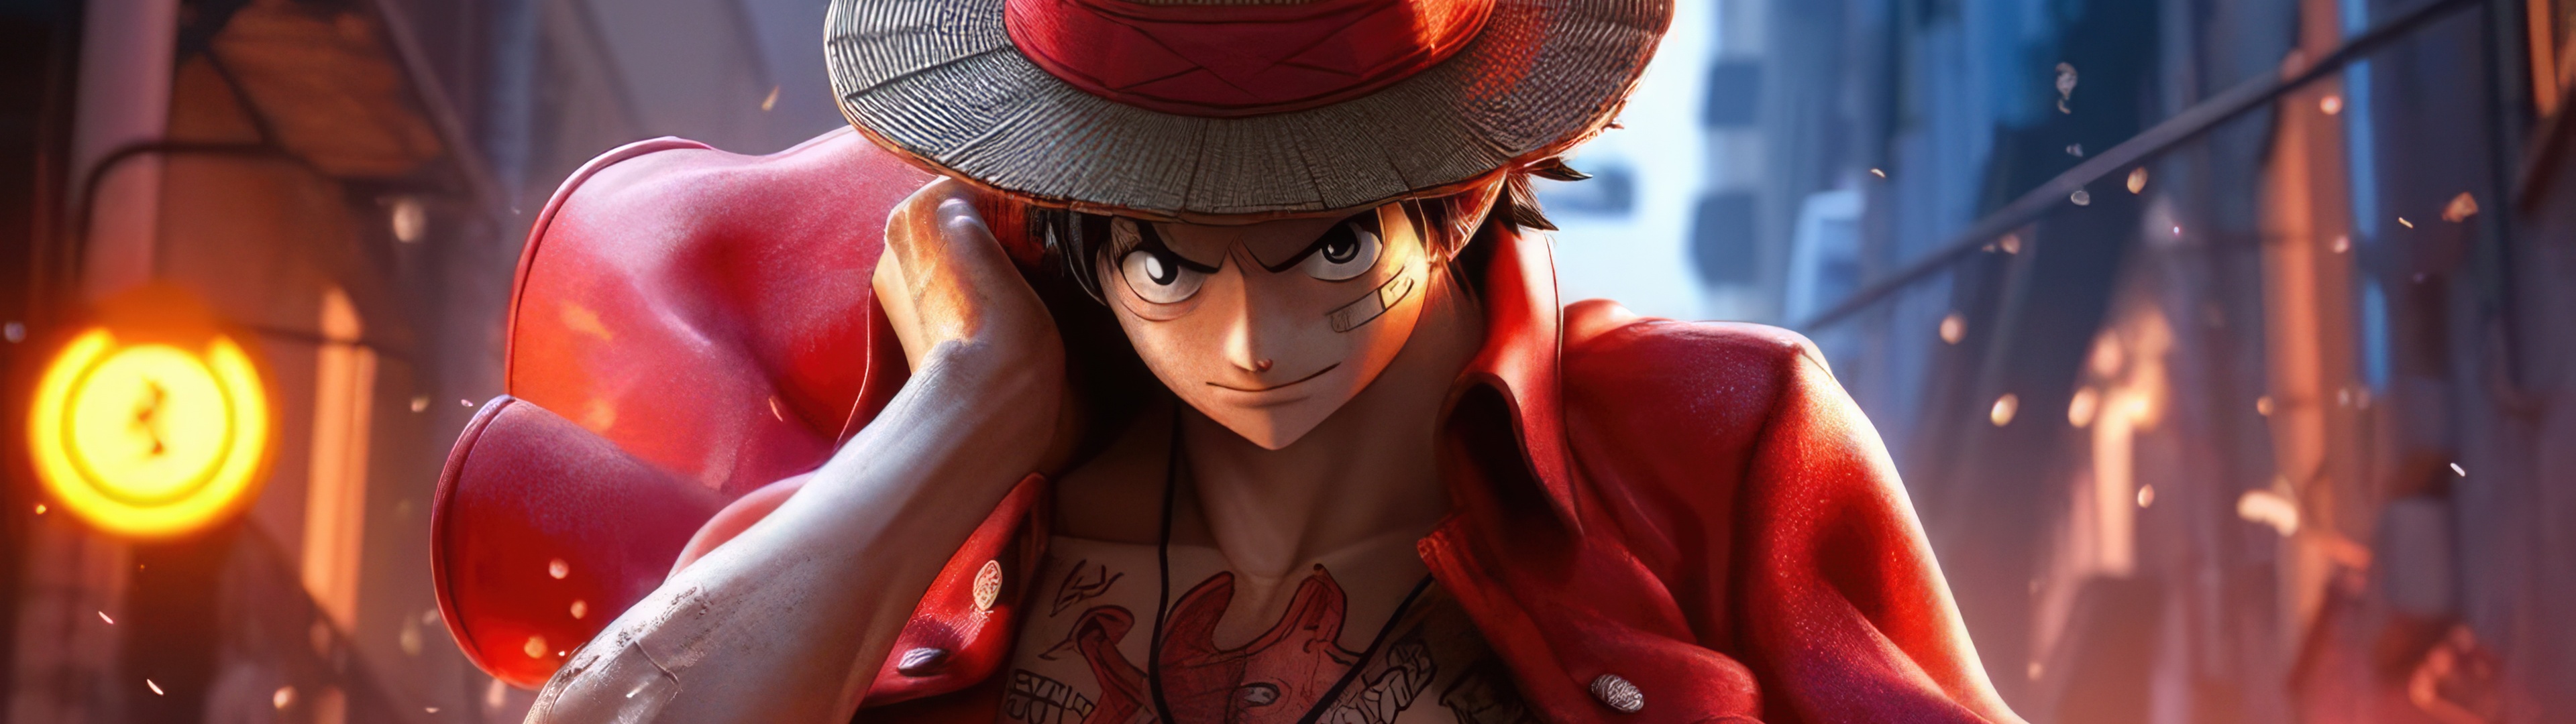 Anime, One Piece, Monkey D. Luffy, real people, lifestyles HD wallpaper